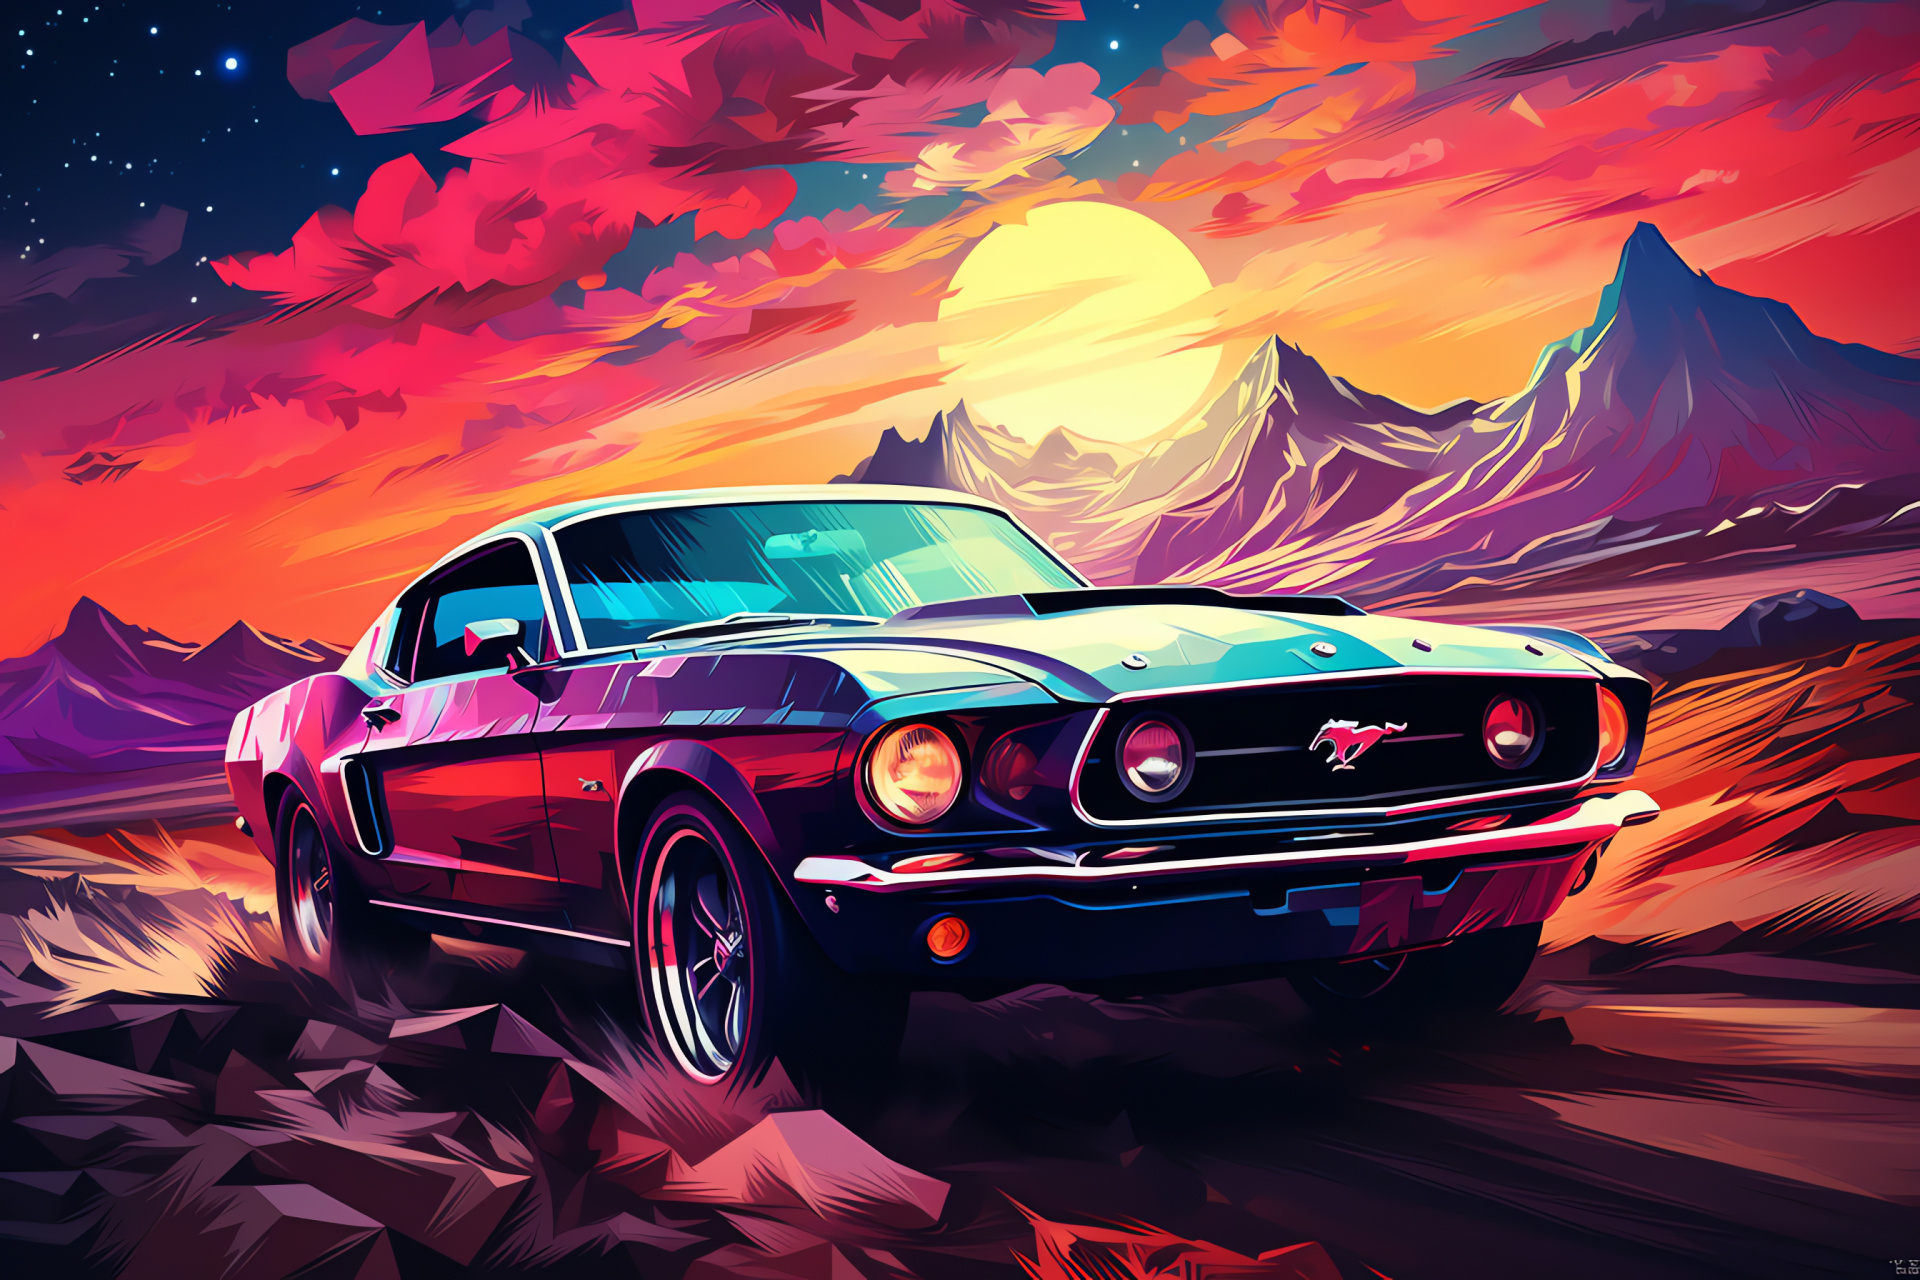 Ford Mustang landscape, Vast plains auto, Mustang silhouette, Low angle muscle car, Powerful design, HD Desktop Wallpaper